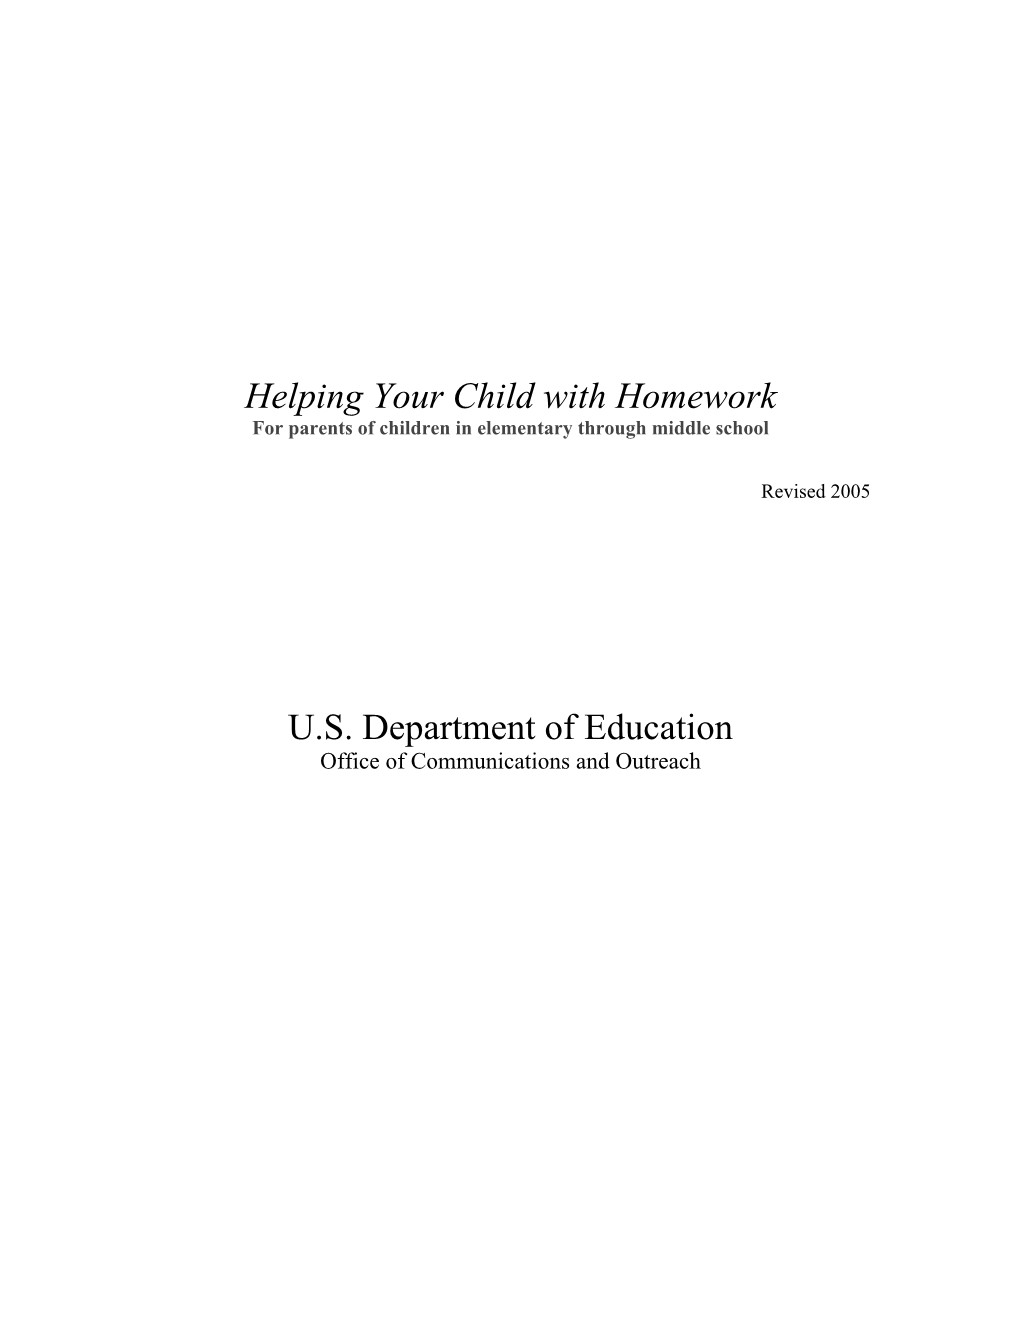 Helping Your Child with Homework U.S. Department of Education